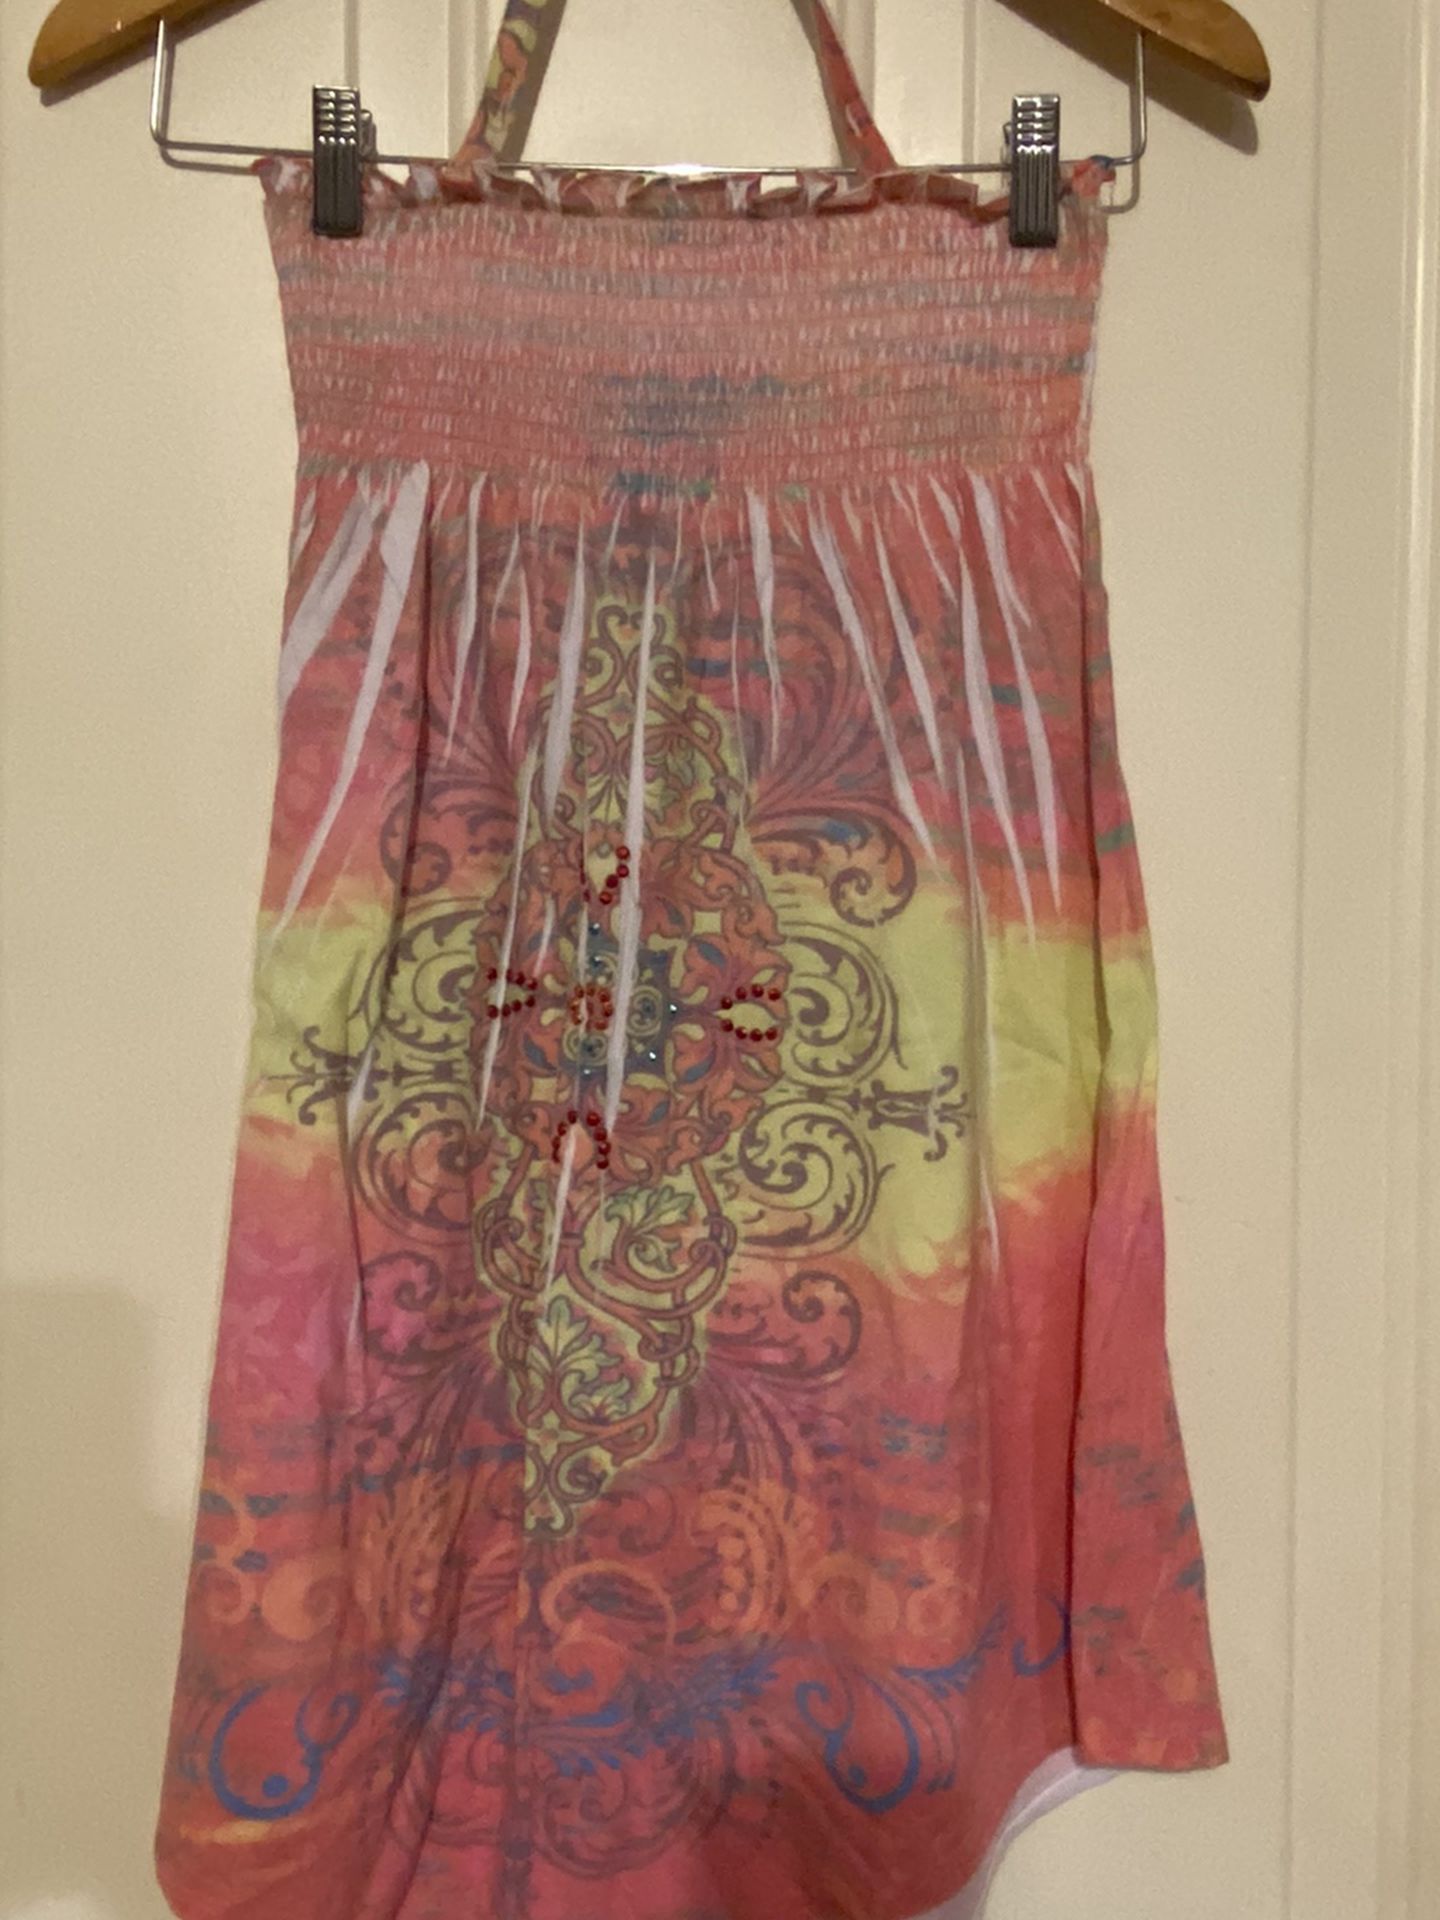 Strapless Halter Top dress -Squeeze Girl size 14